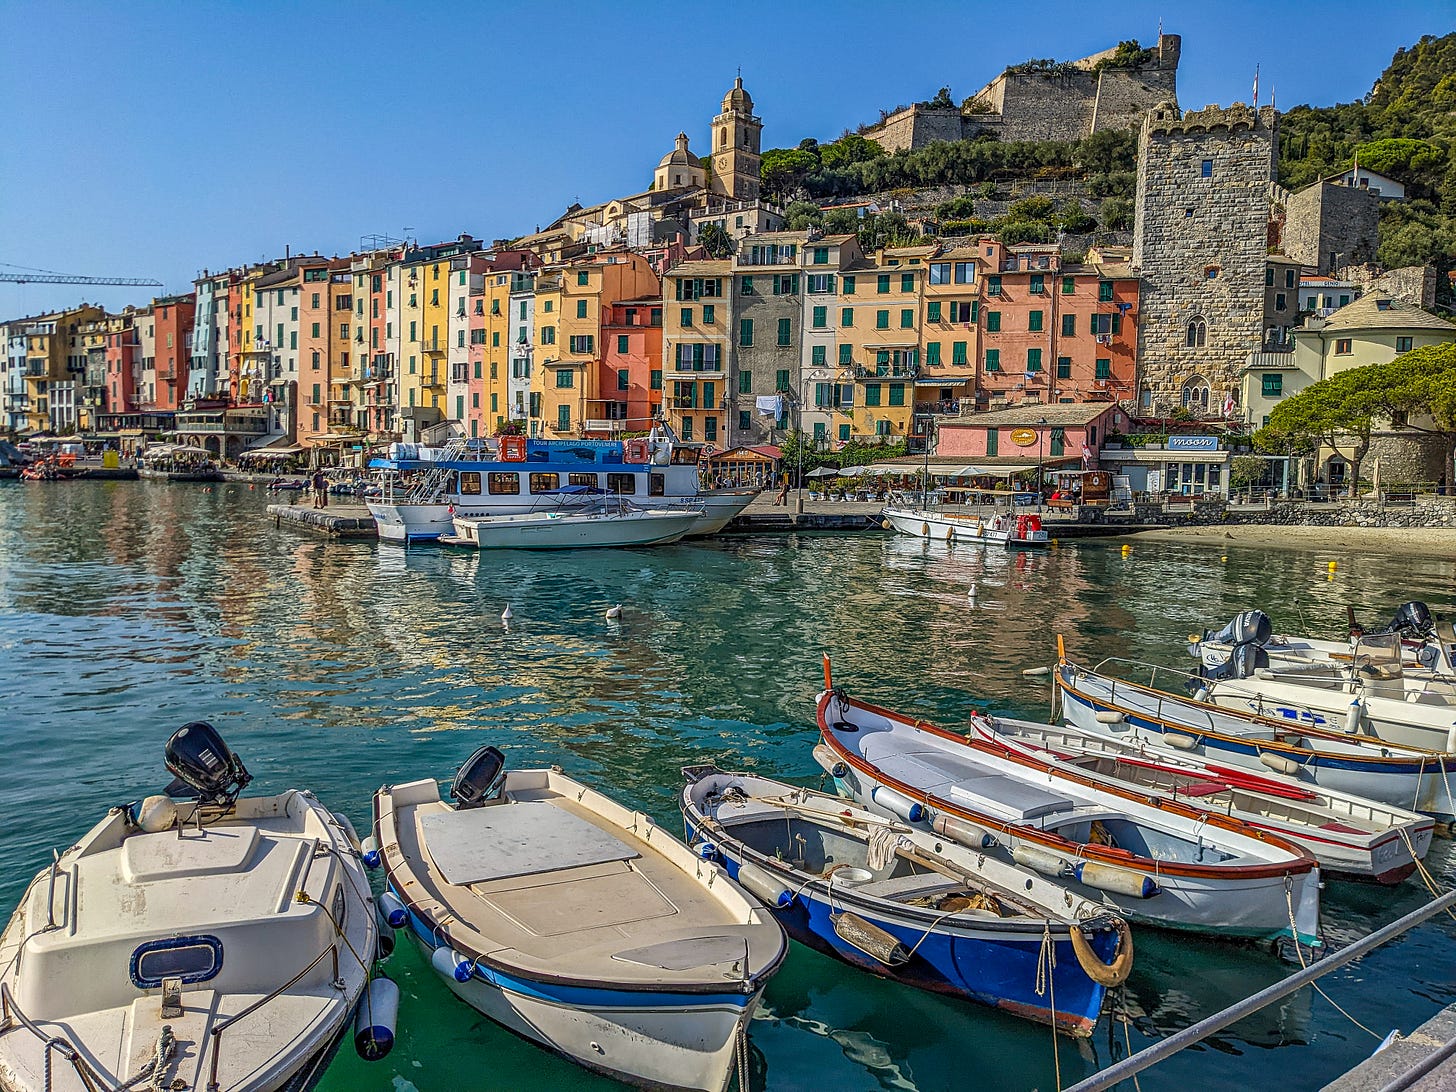 Portovenere's colorful waterfront with empty boats docked in the foreground, the colorful buildings of town on the other side of the water. 